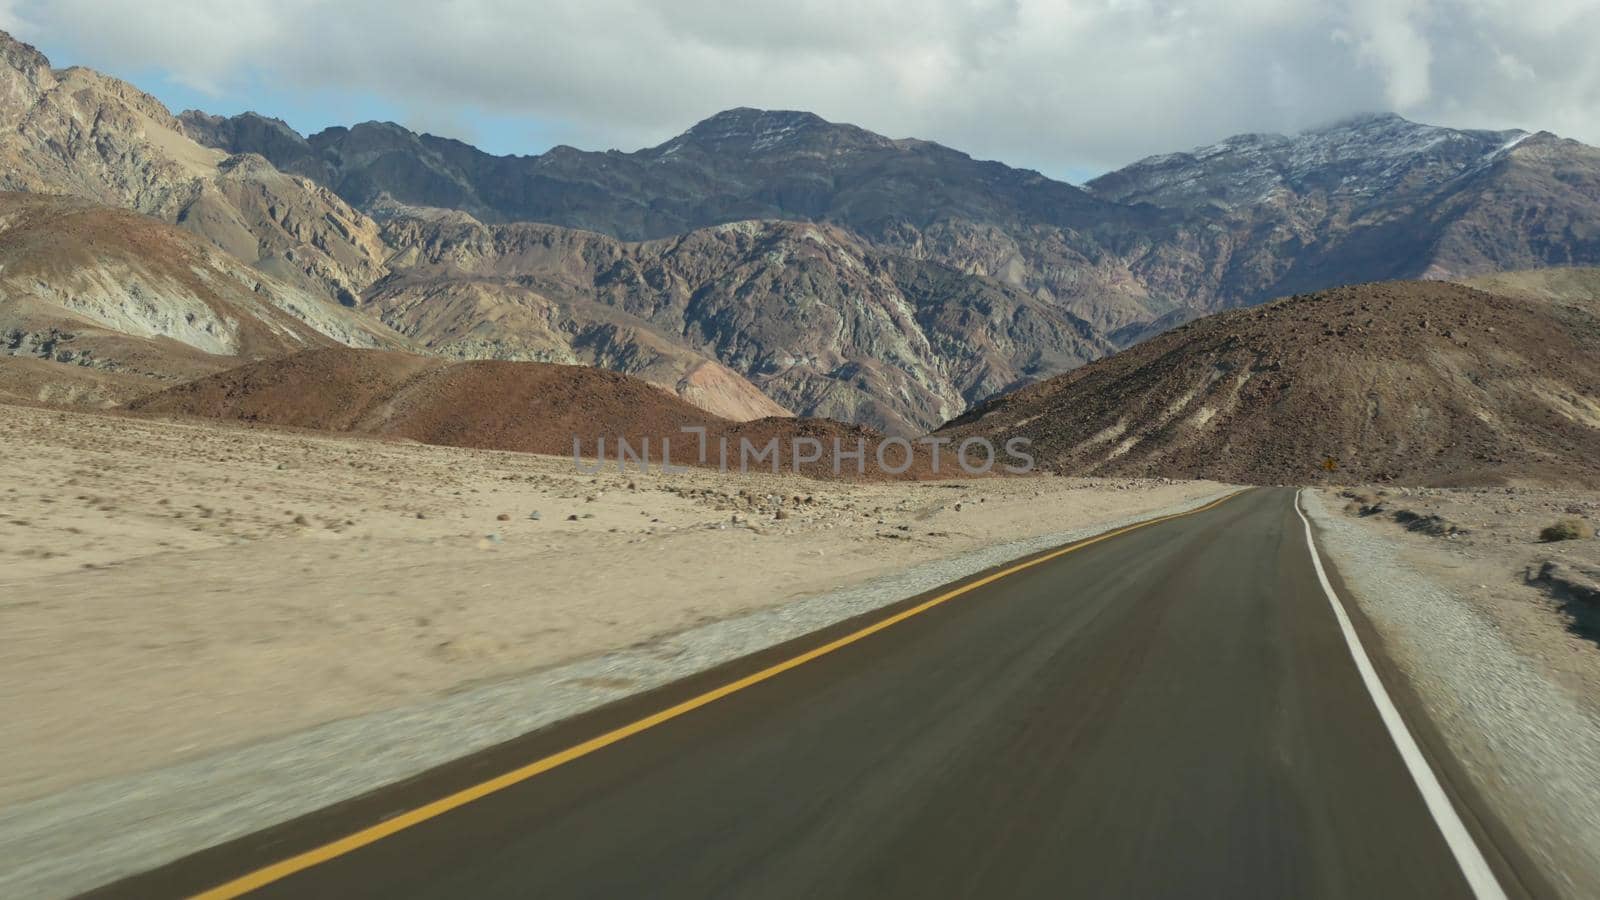 Road trip to Death Valley, Artists Palette drive, California USA. Hitchhiking auto traveling in America. Highway, colorful bare mountains and arid climate wilderness. View from car. Journey to Nevada by DogoraSun